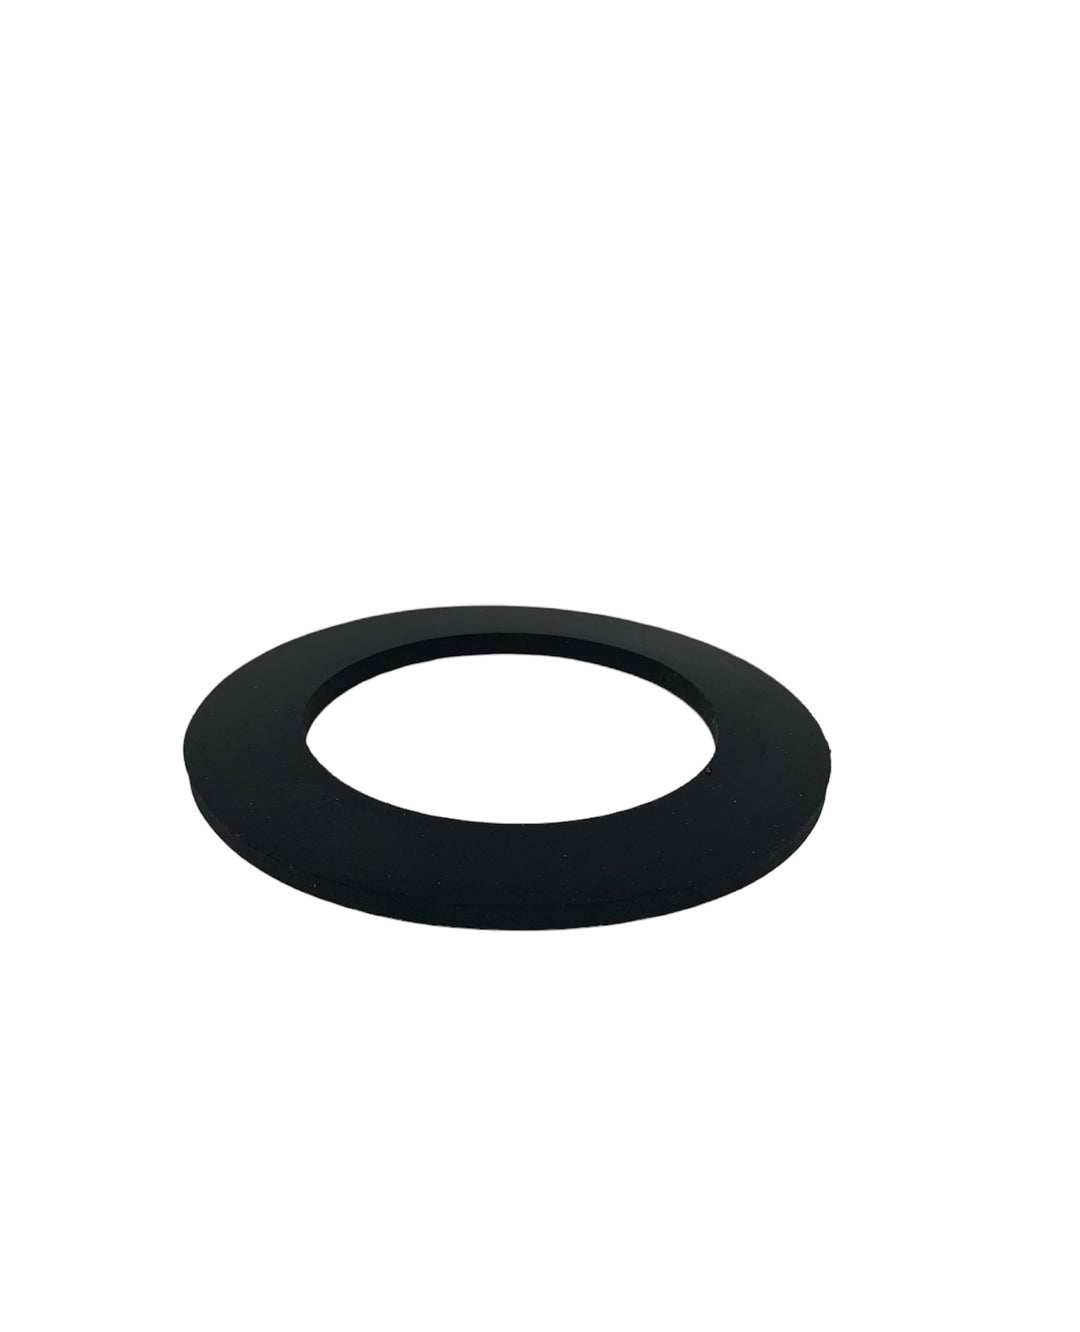 2.5" Rubber Gasket Only - P9000/ P12000/ Explorer